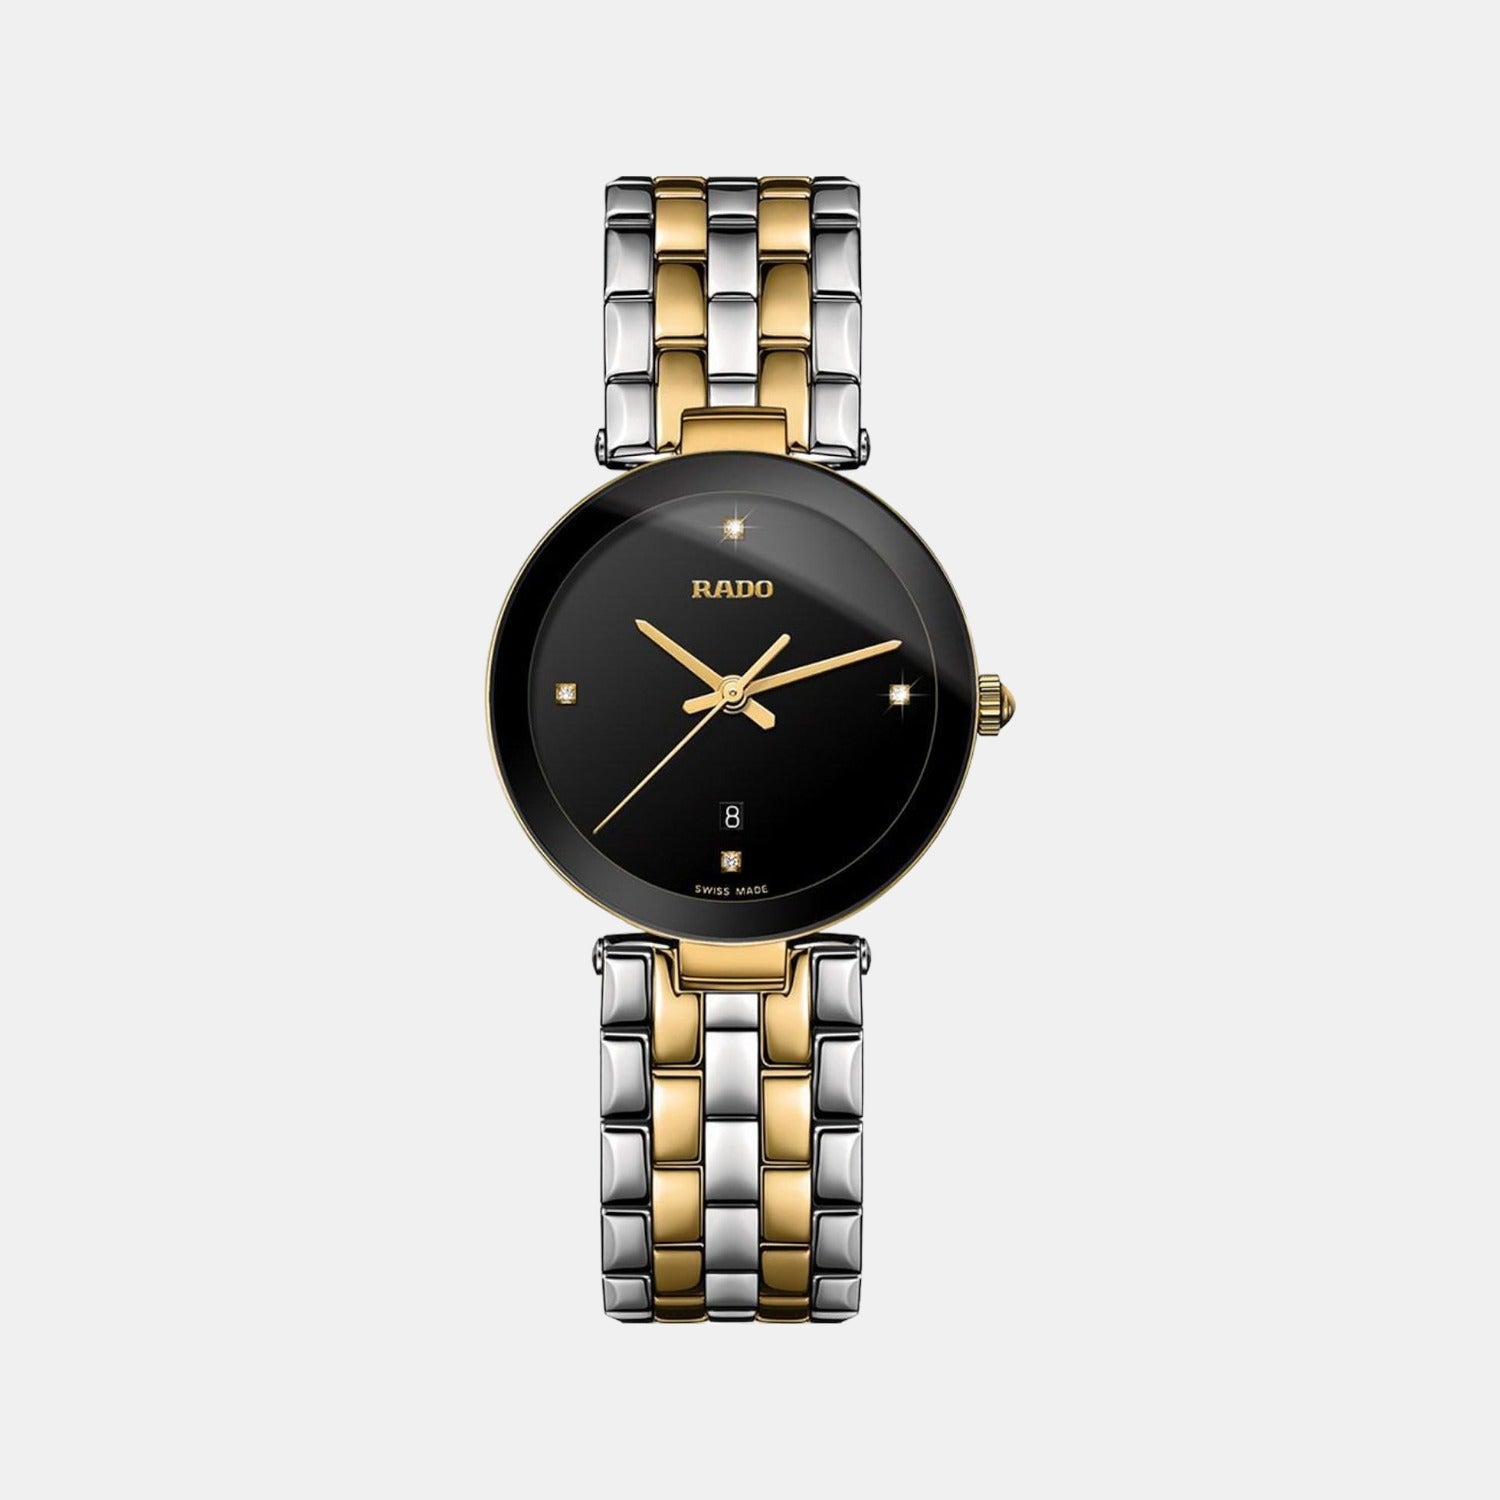 Rado Florence 160.3409.2 Date Yellow Gold Steel 25MM Unisex... for $895 for  sale from a Trusted Seller on Chrono24